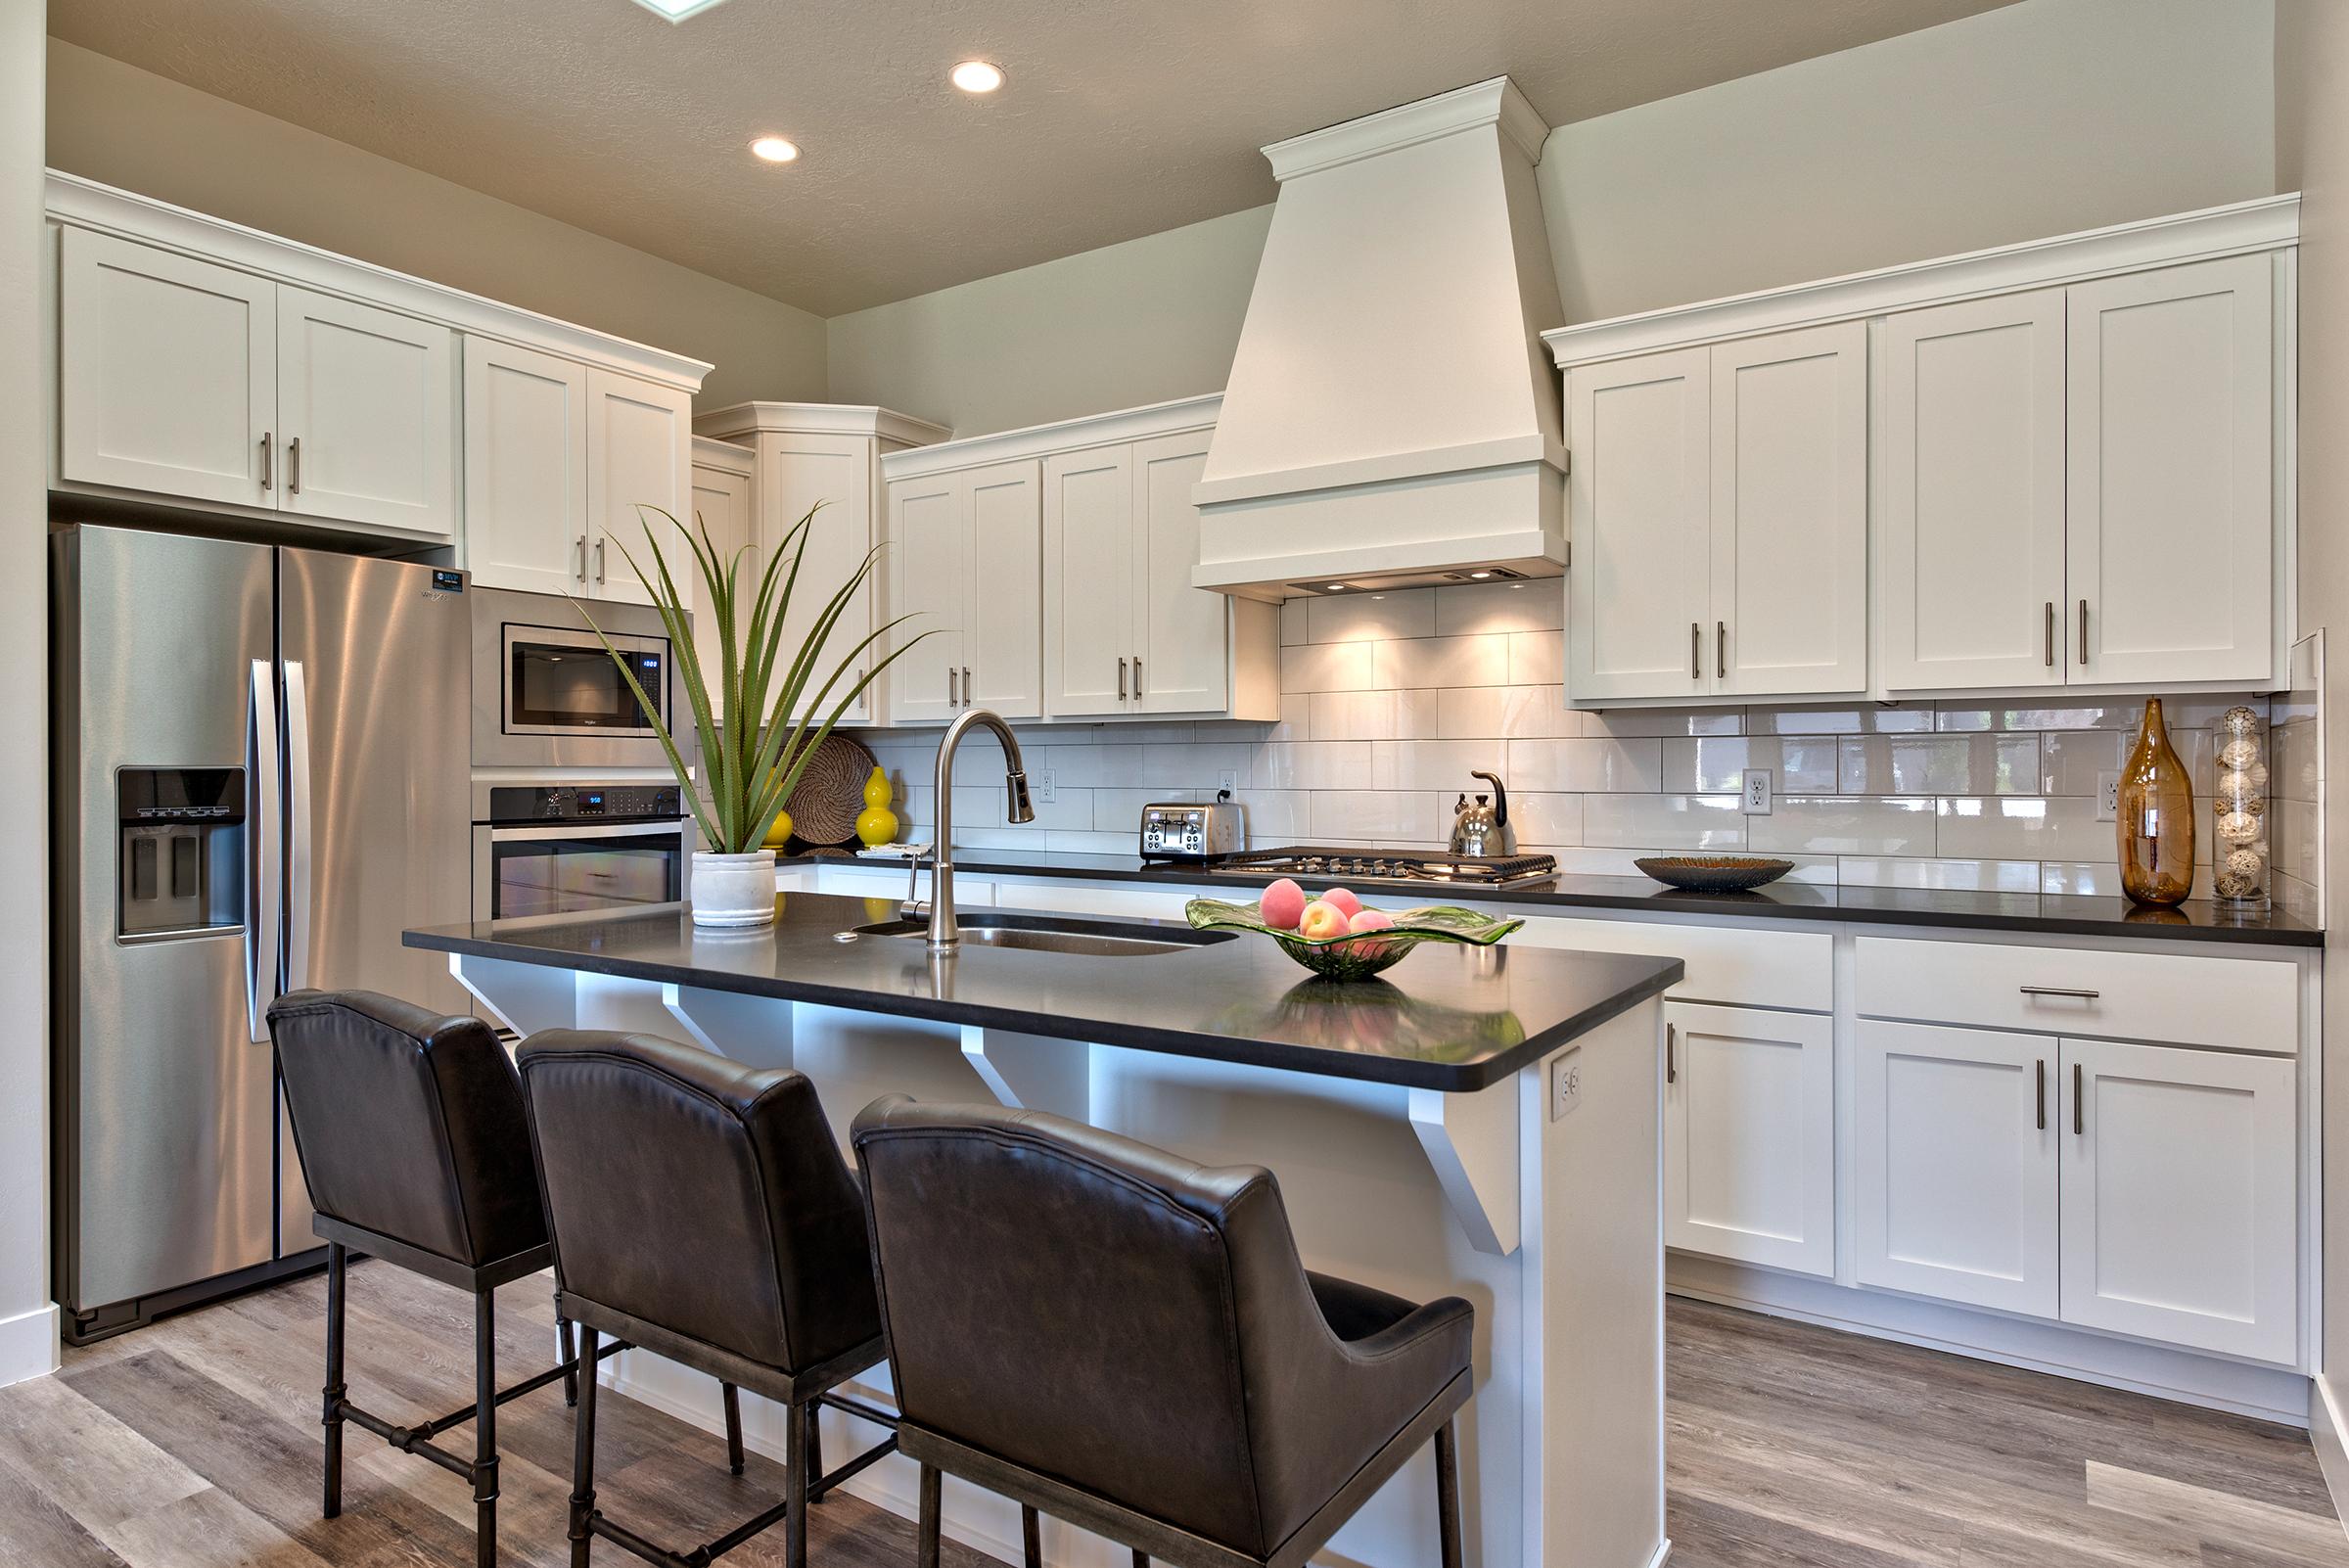 The Kitchen is fully stocked with all the dishes, cookware, baking pans, and cutlery you will need for meal preparations and includes stainless steel appliances and granite counter tops. 